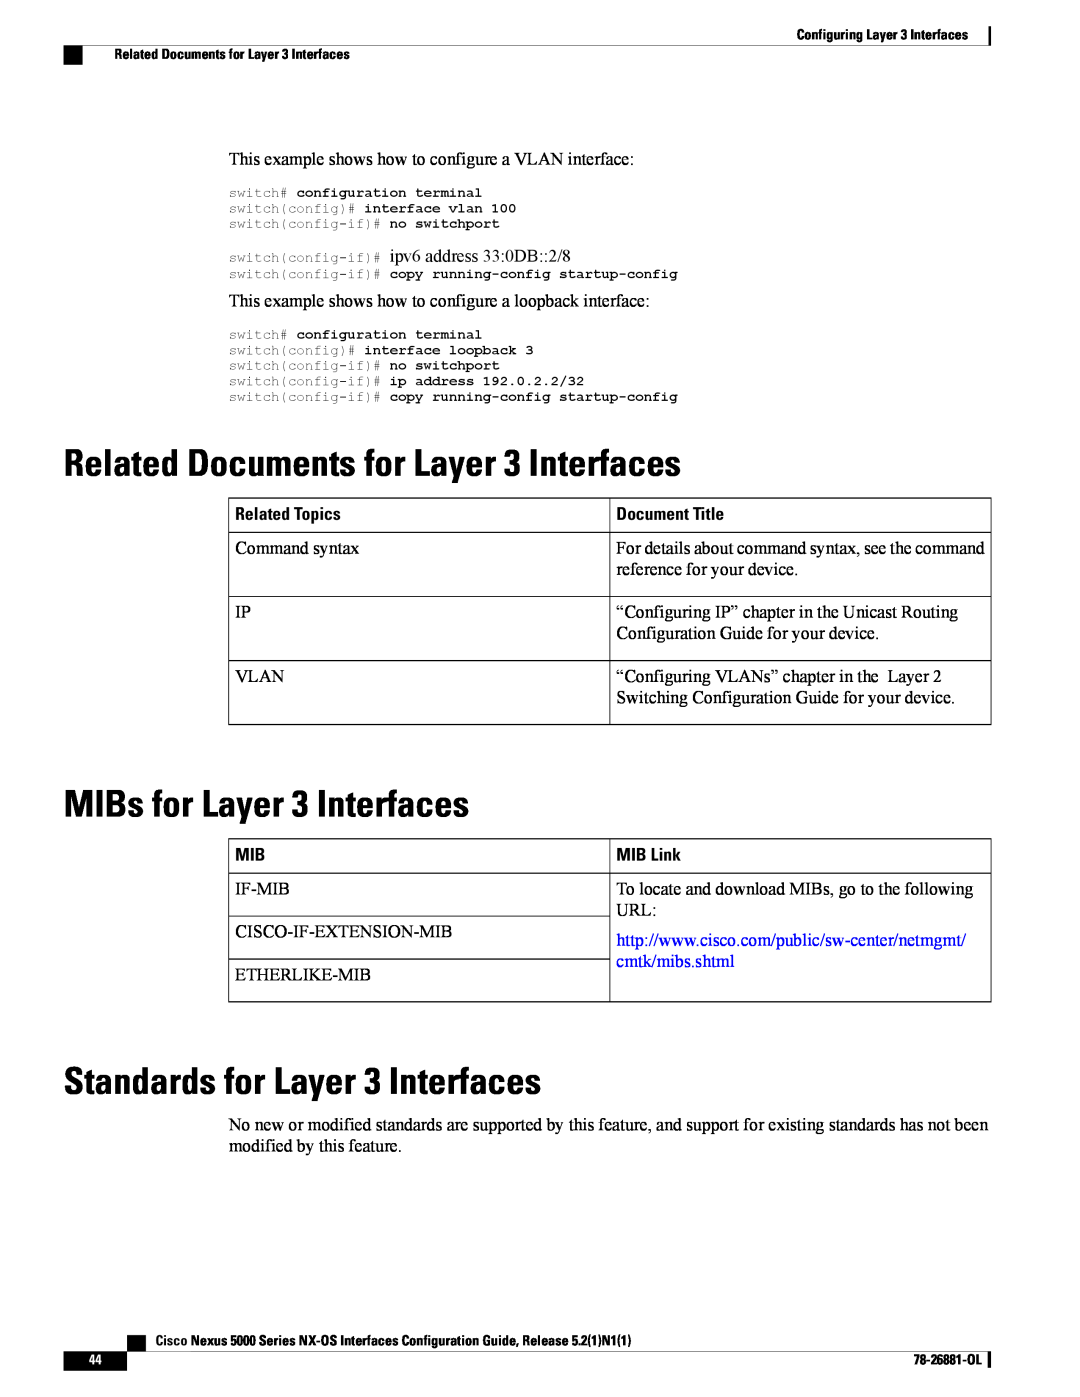 Cisco Systems N5KC5596TFA Related Documents for Layer 3 Interfaces, MIBs for Layer 3 Interfaces, Related Topics, MIB Link 